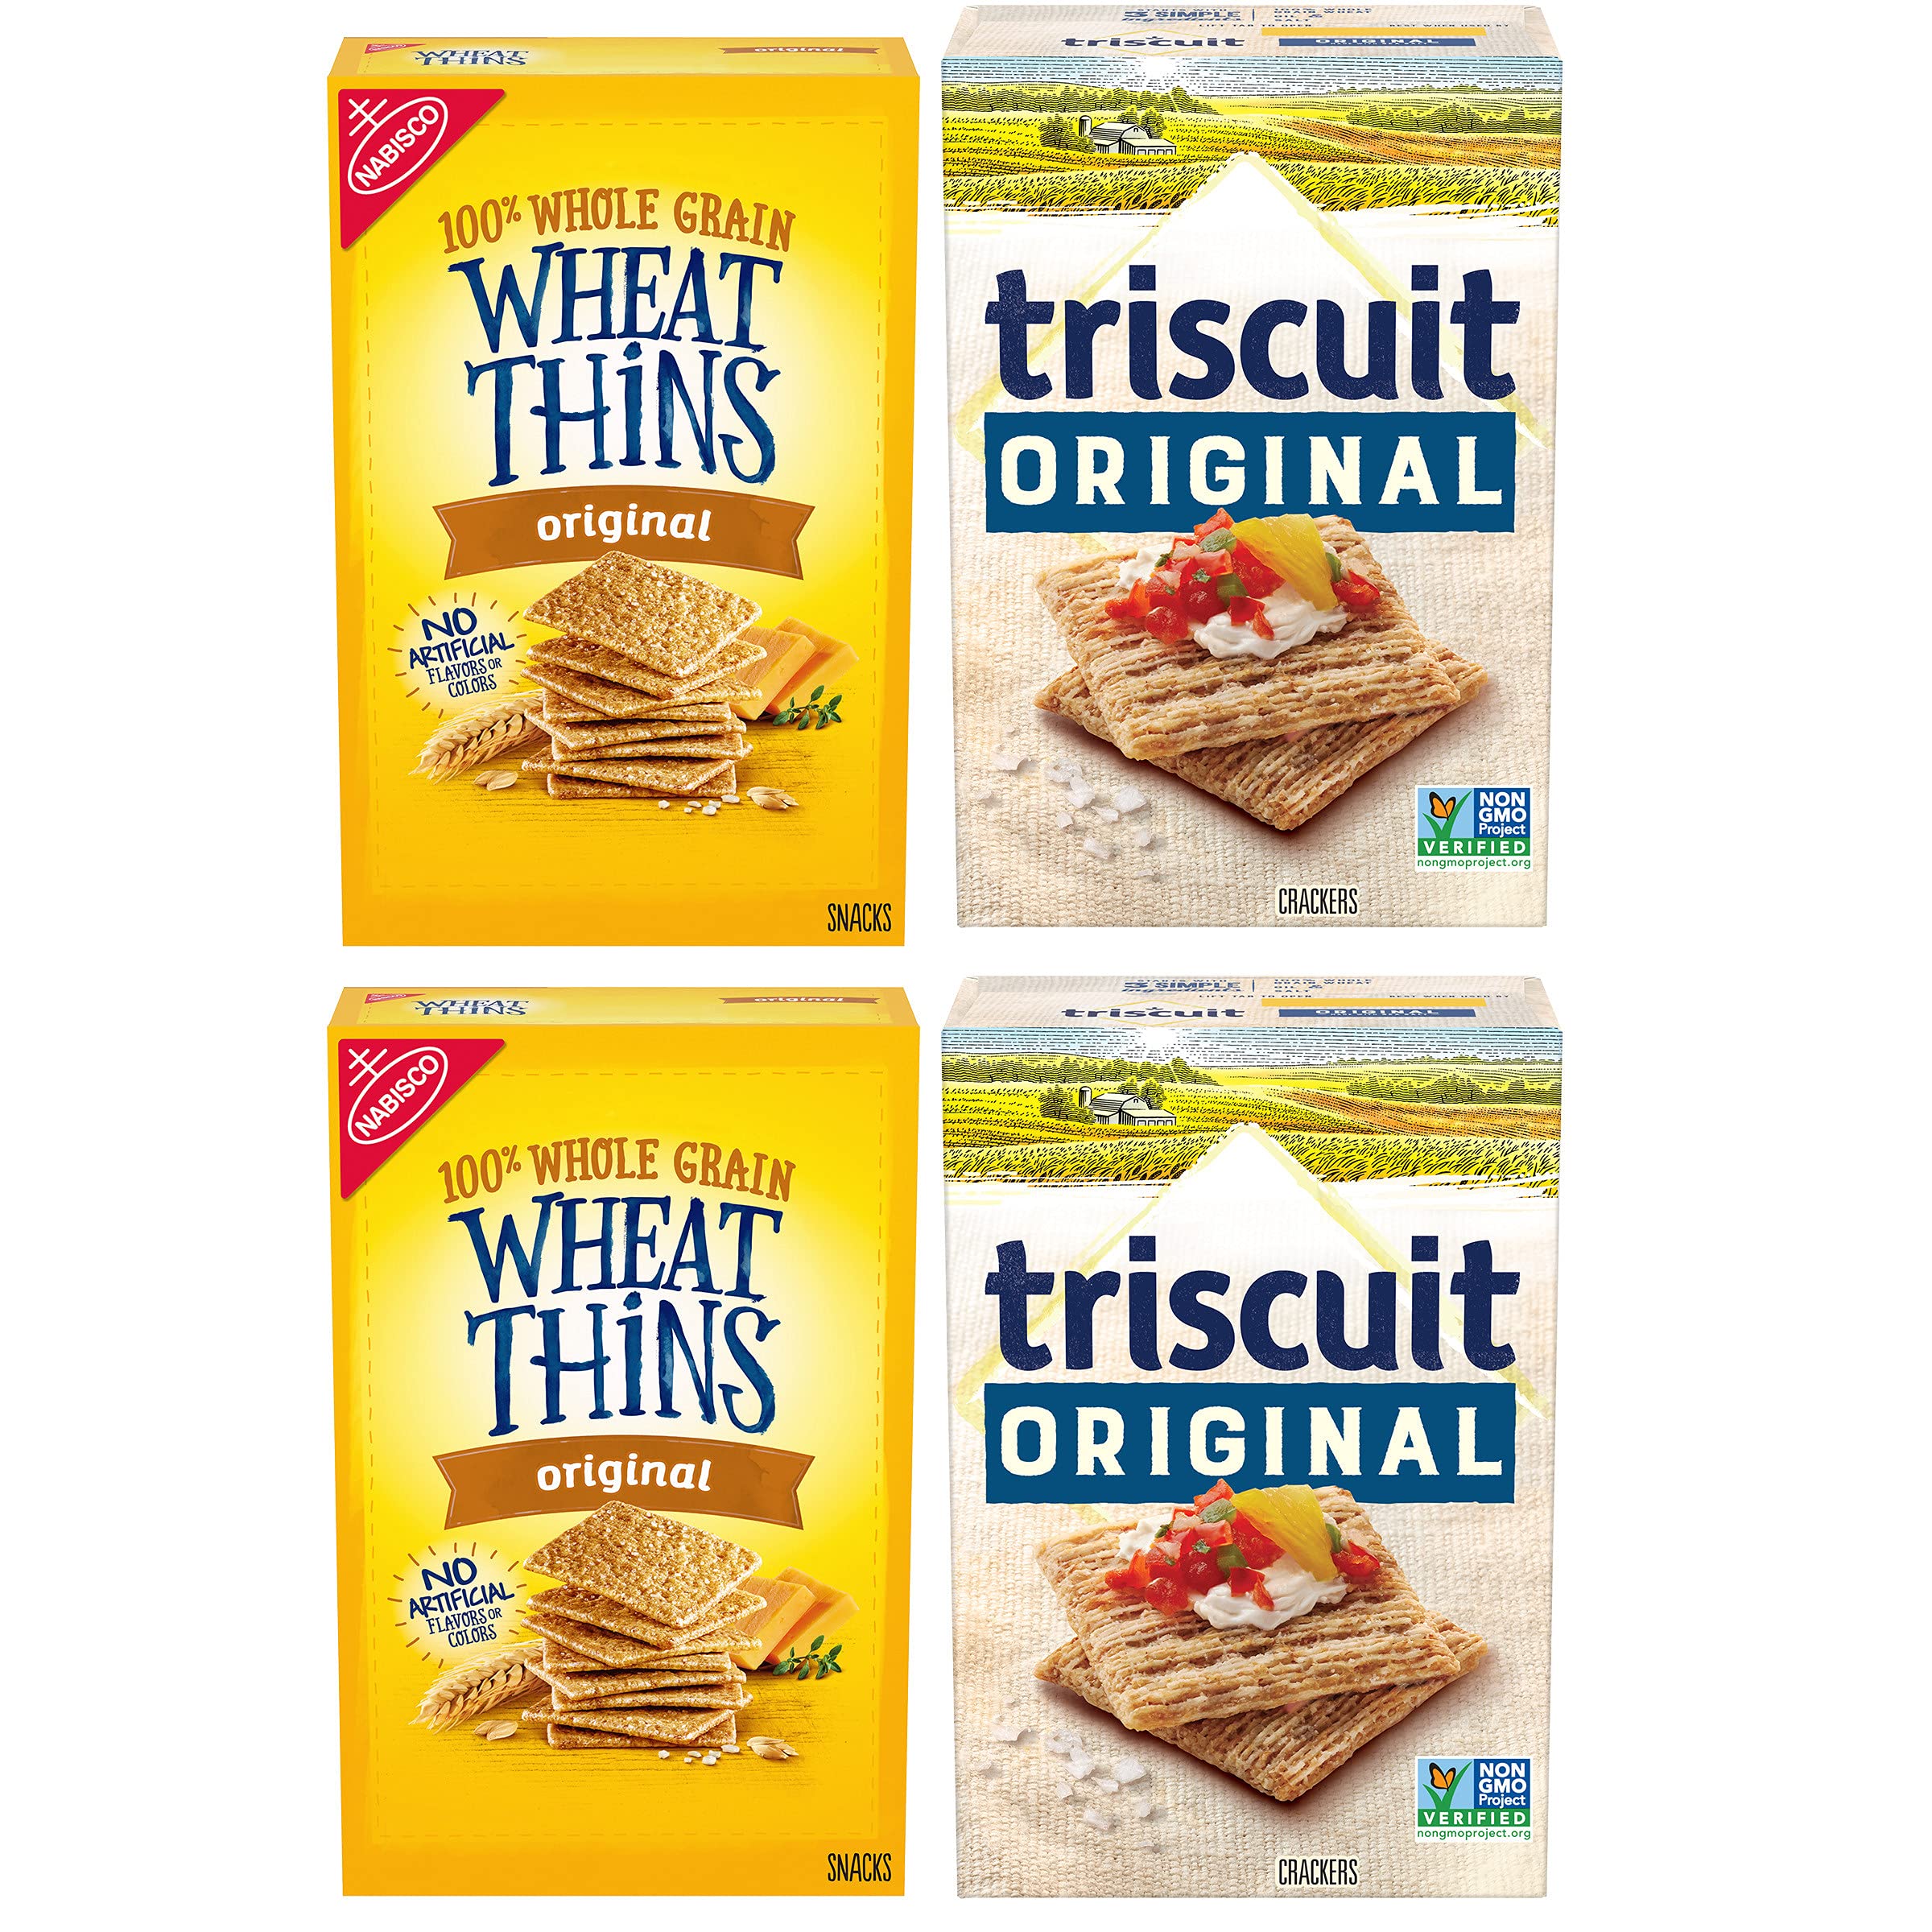 Wheat Thins Original and Triscuit Original Crackers Variety Pack, 4 Boxes~$7.71 @ Amazon~Free Prime Shipping!